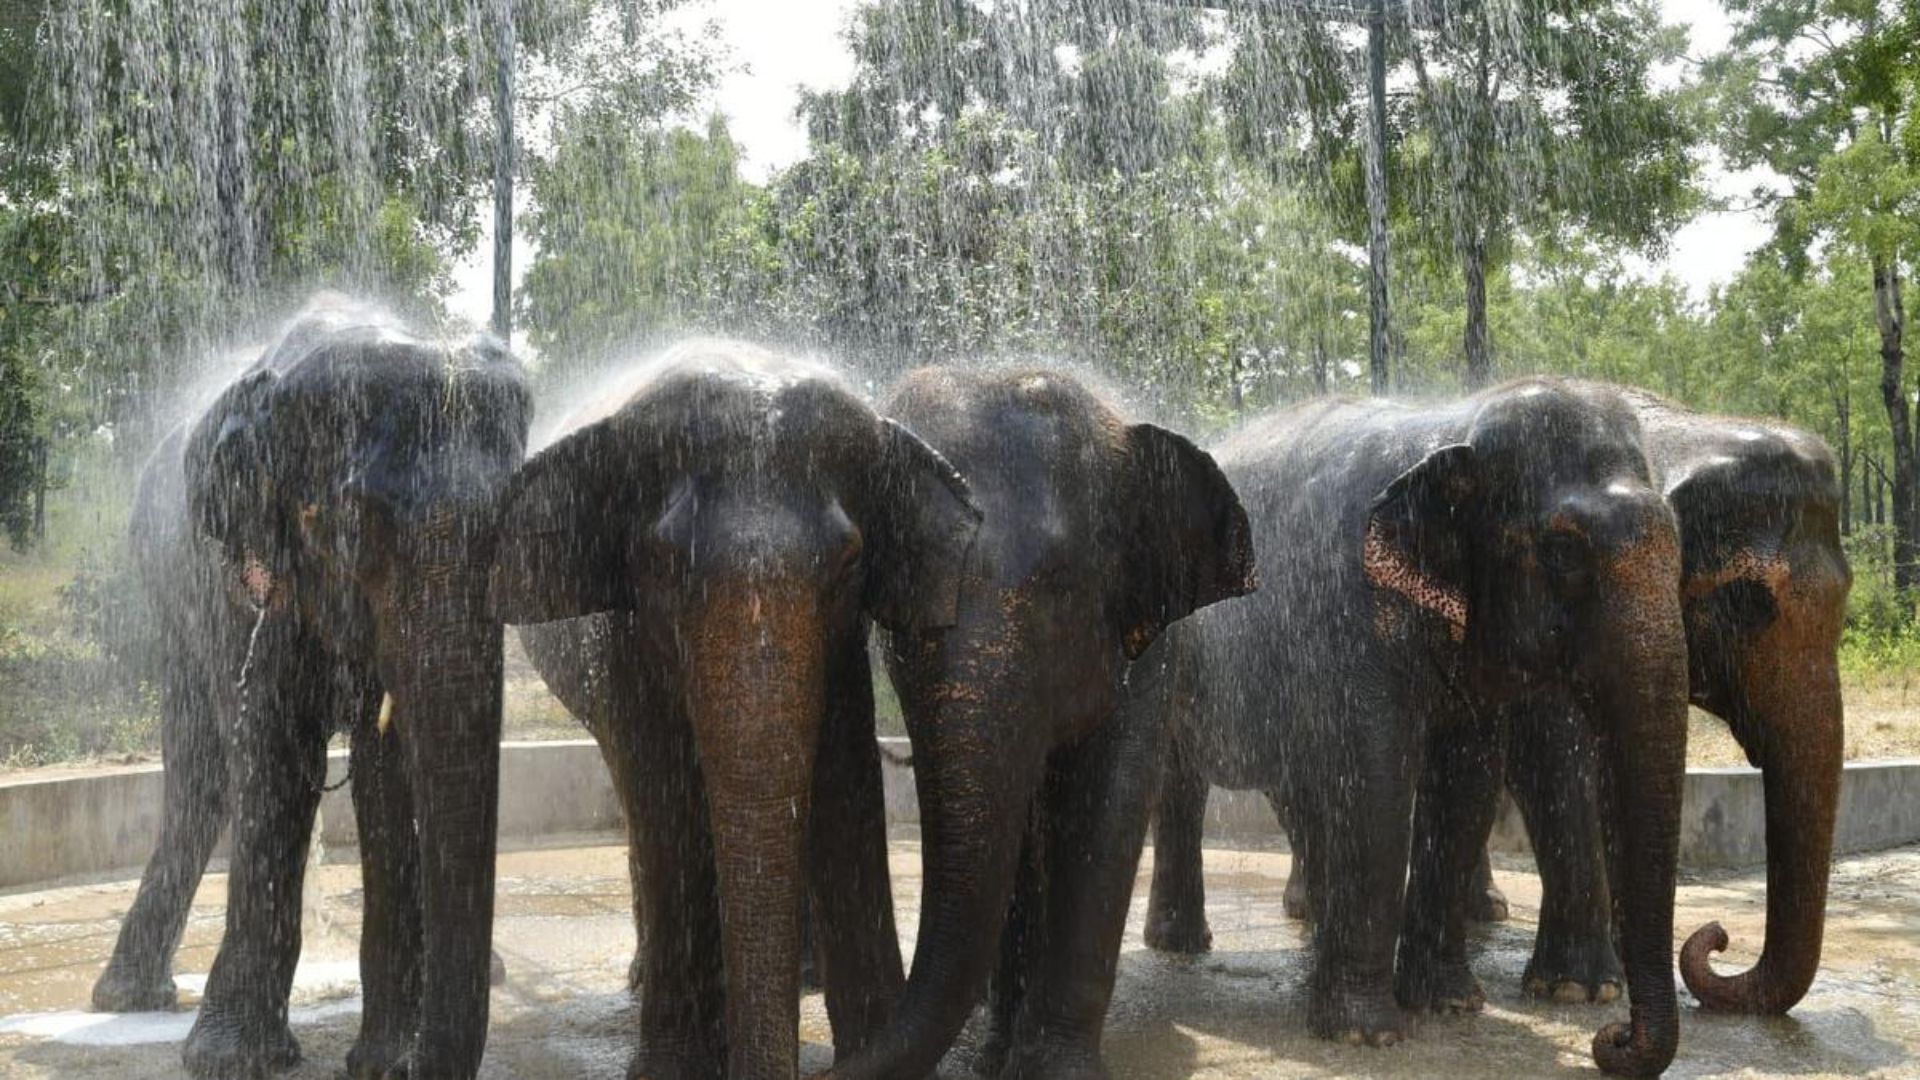 Special arrangements in Trichy to keep elephants cool from summer heat